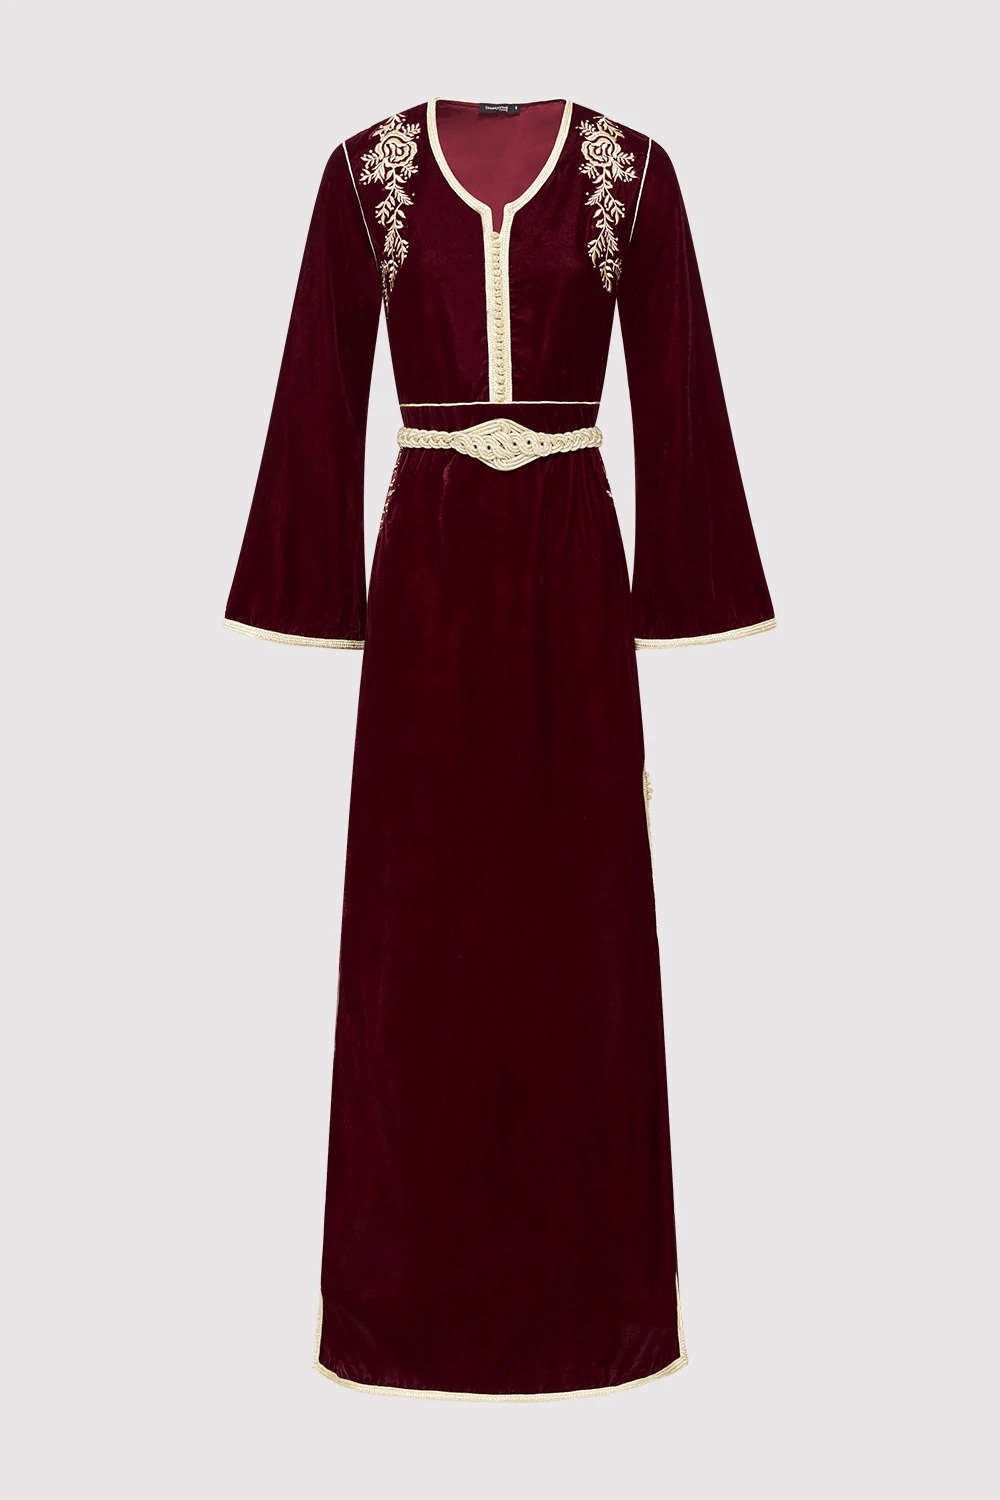 Lebssa Lola Velour Embroidered Occasion Wear Long Dress and Metallic Belt in Burgundy